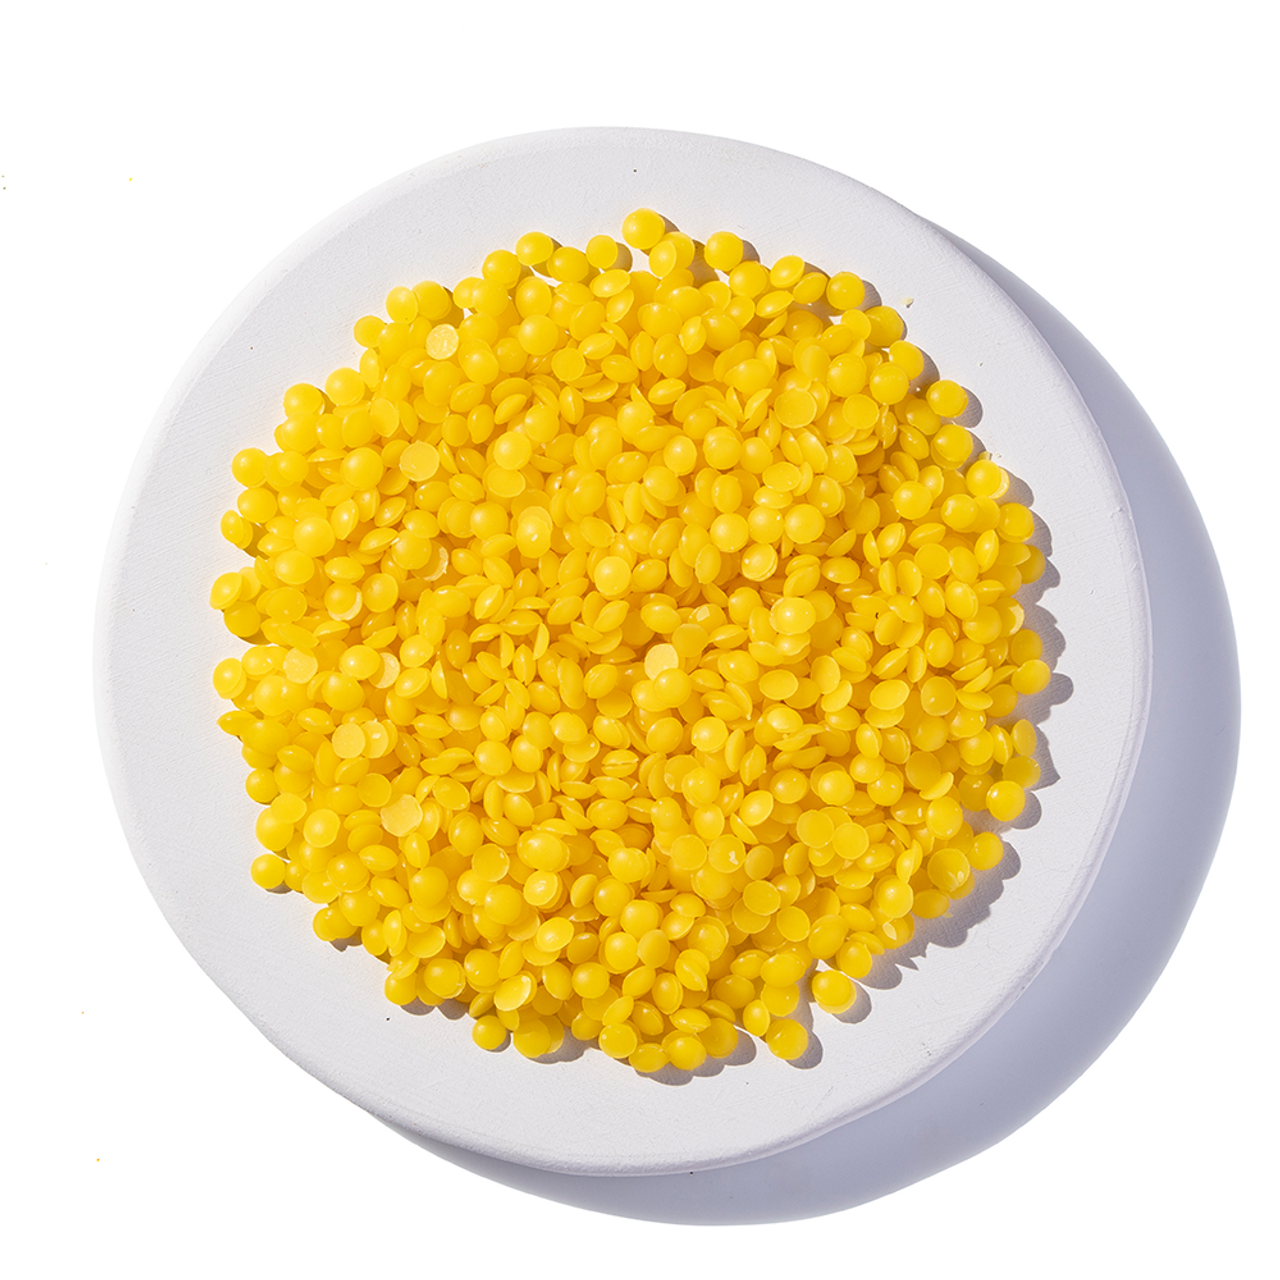 25 pounds 100% Pure Beeswax ~Bulk Yellow Bees Wax~